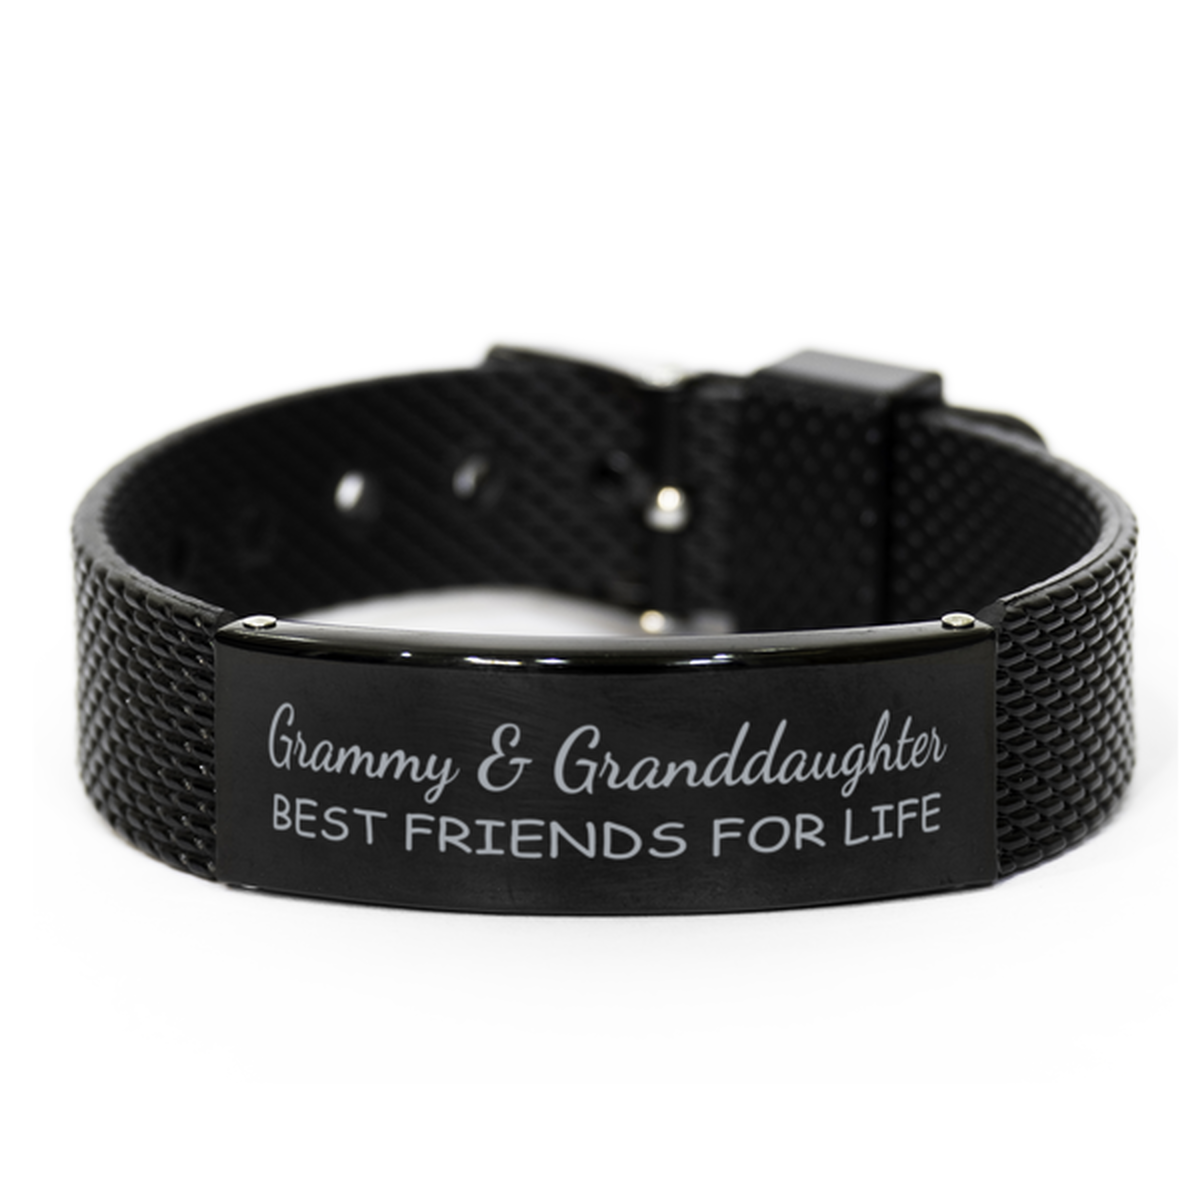 Grammy and Granddaughter Best Friends for Life Bracelet, Grammy Granddaughter Bracelet, Black Stainless Steel Leather Bracelet, Birthday, Christmas.